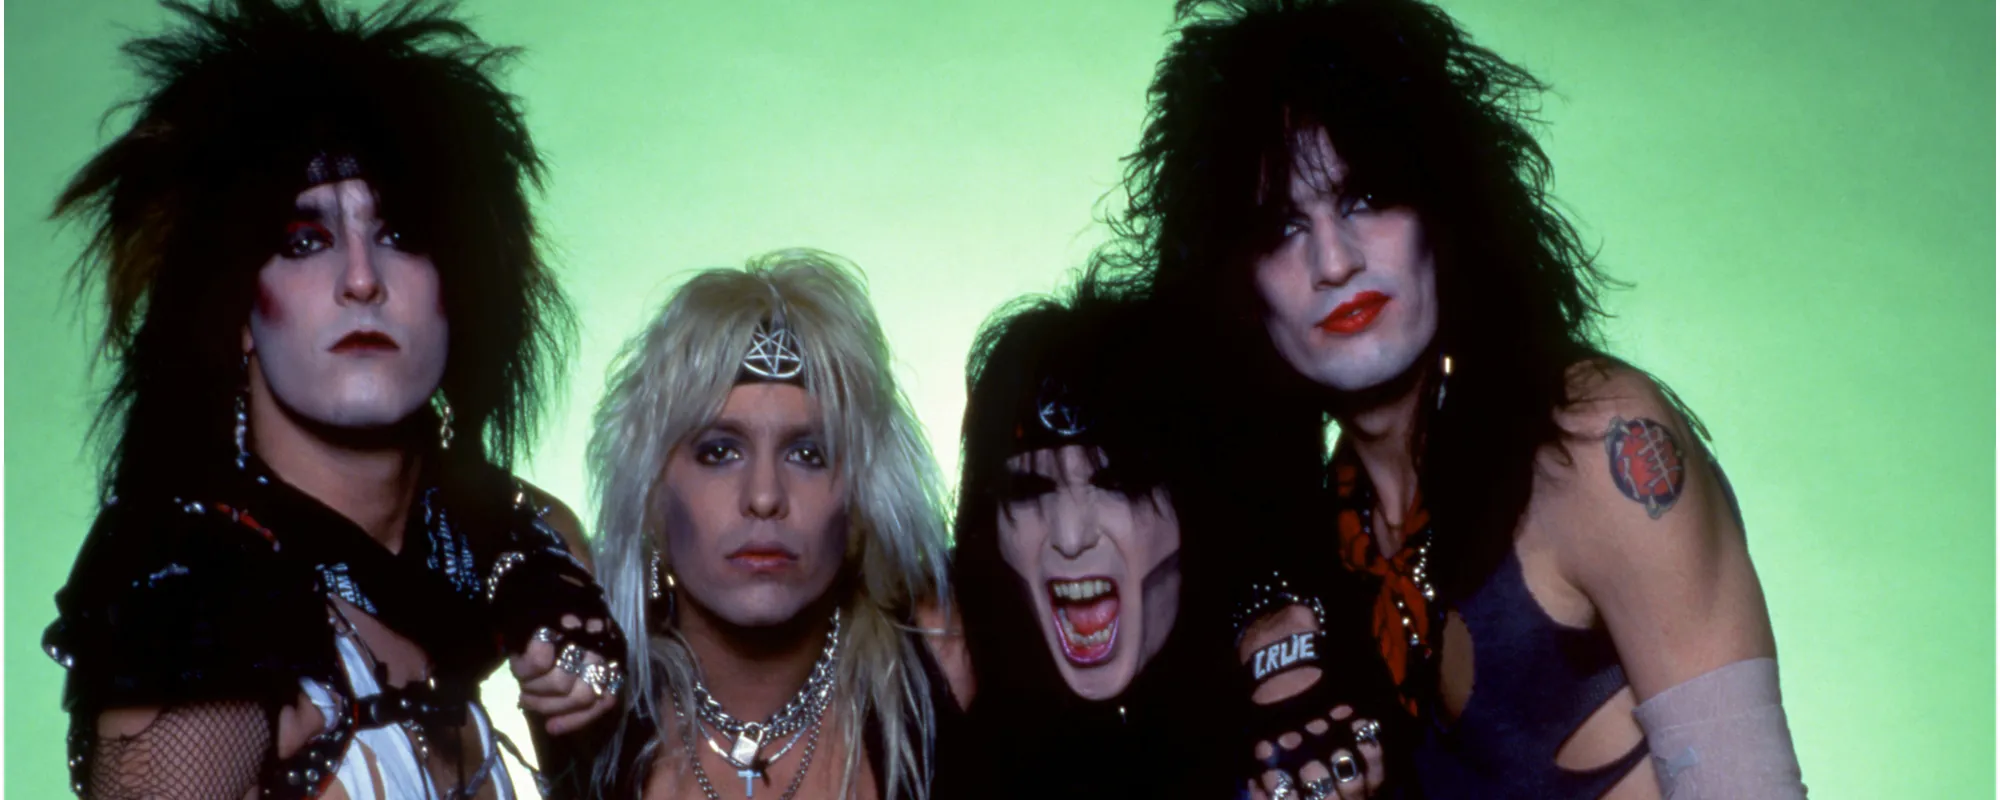 Now That's Nifty: The Best Hair of the 80's Hair Metal Bands